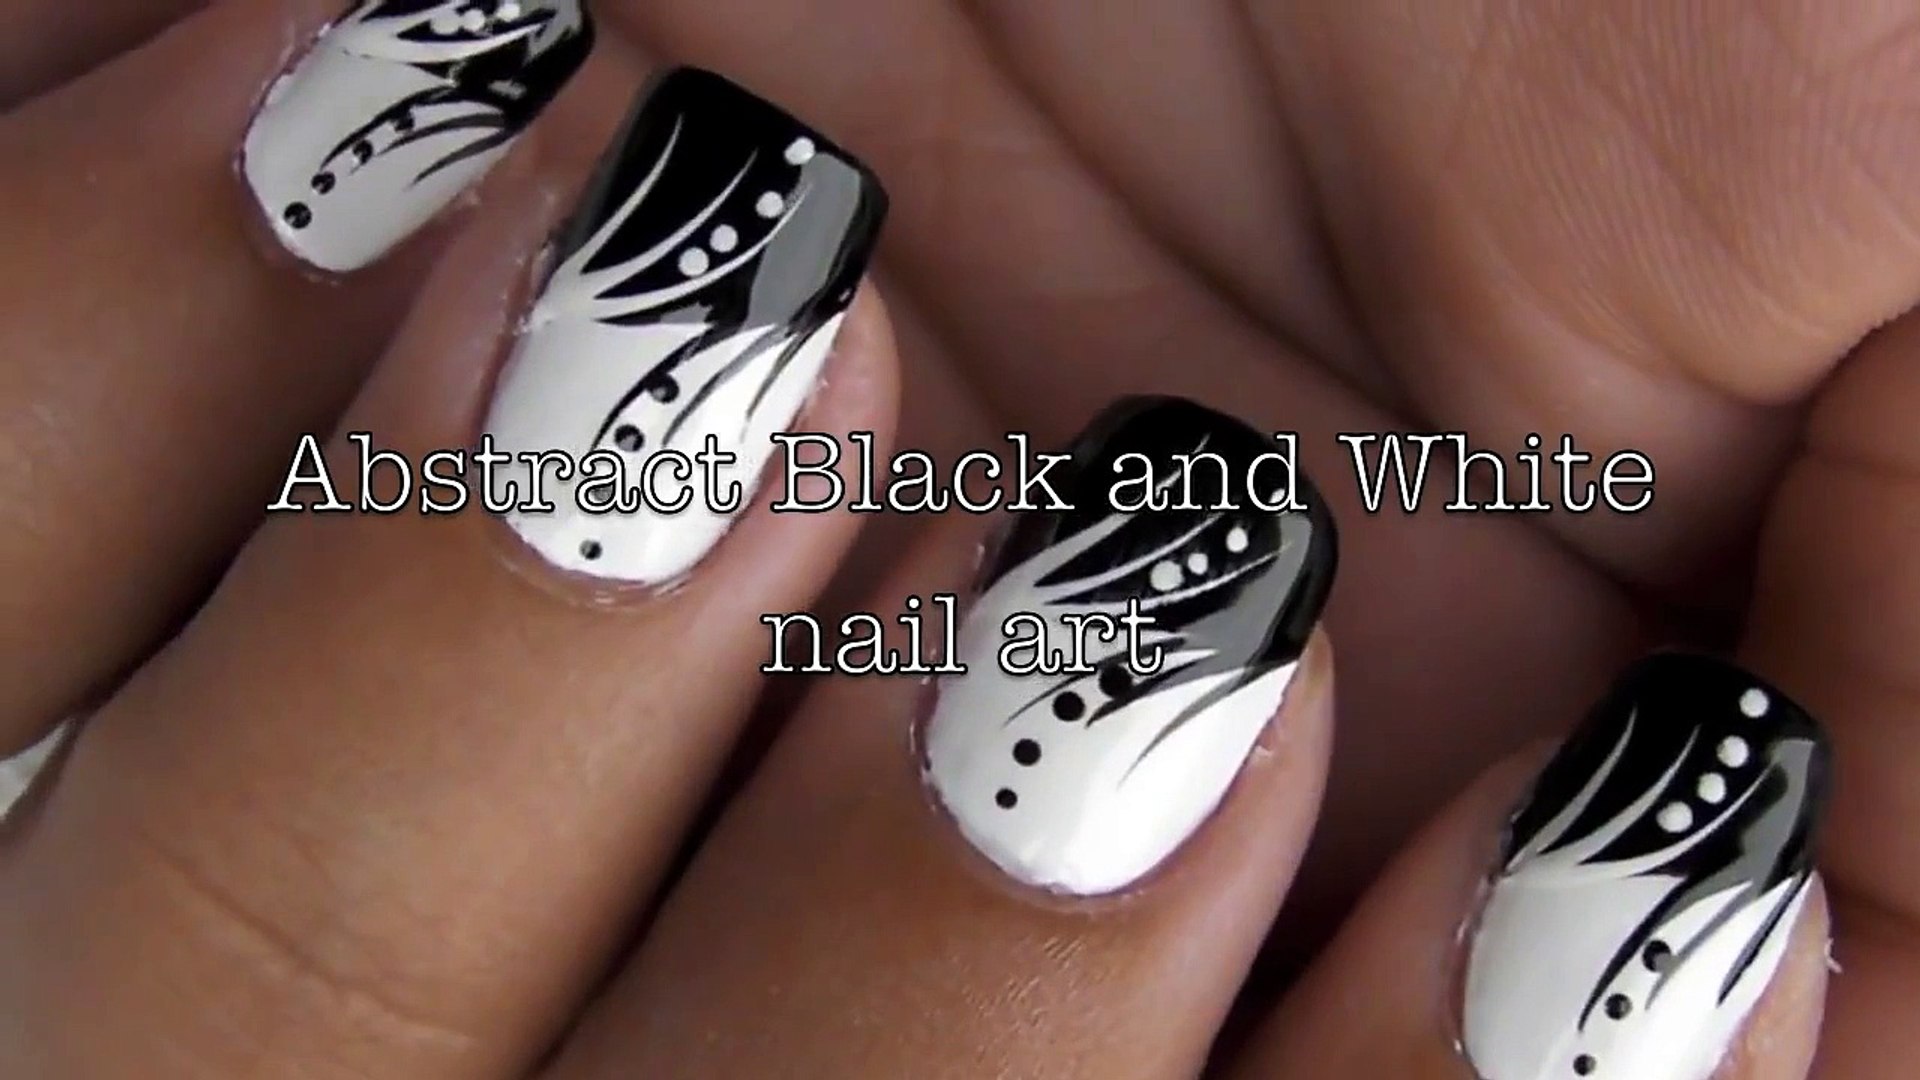 Black and White Nail Art Tutorial on Tumblr - wide 3